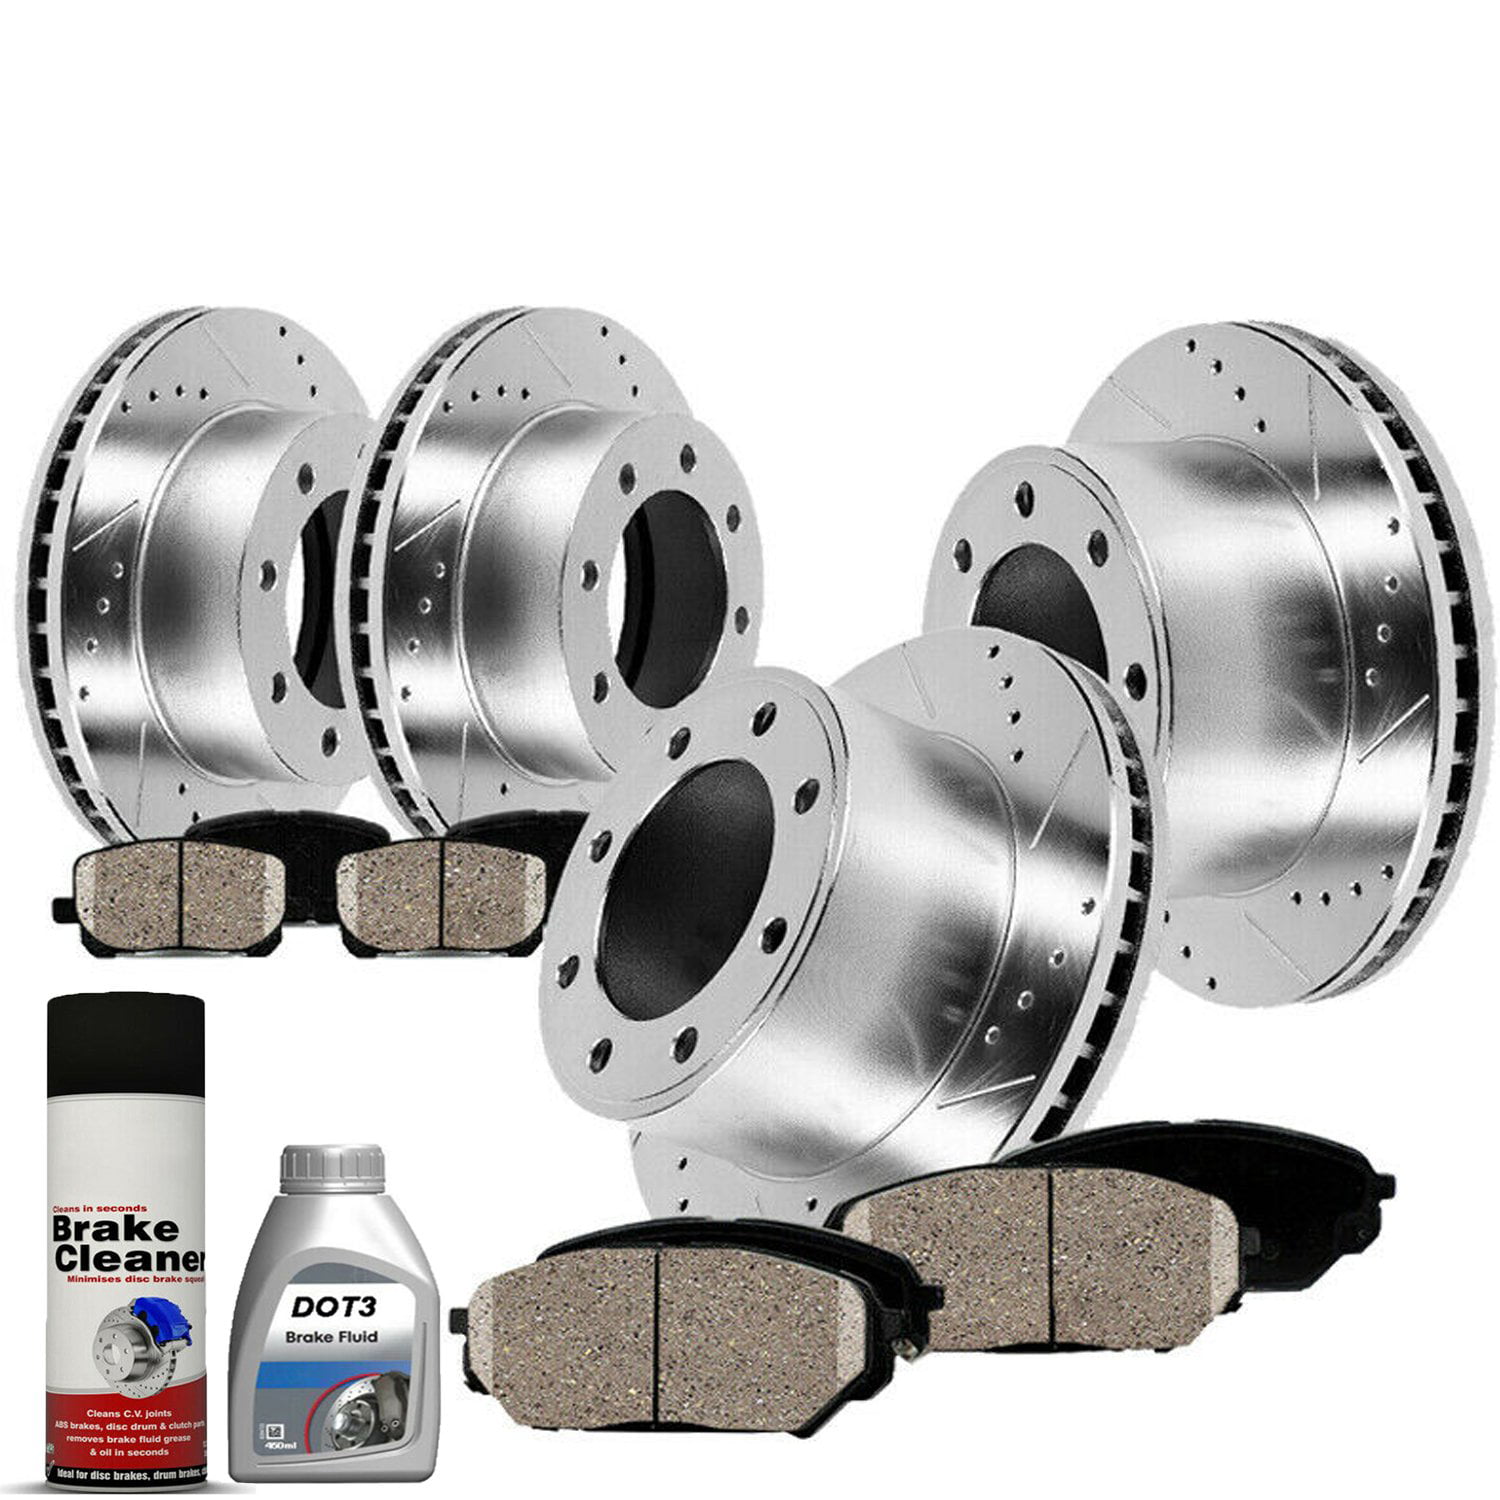 Brake Pads Ford F-250 F-350 Super Duty Brakes 4WD Front and Rear Brake Rotors 